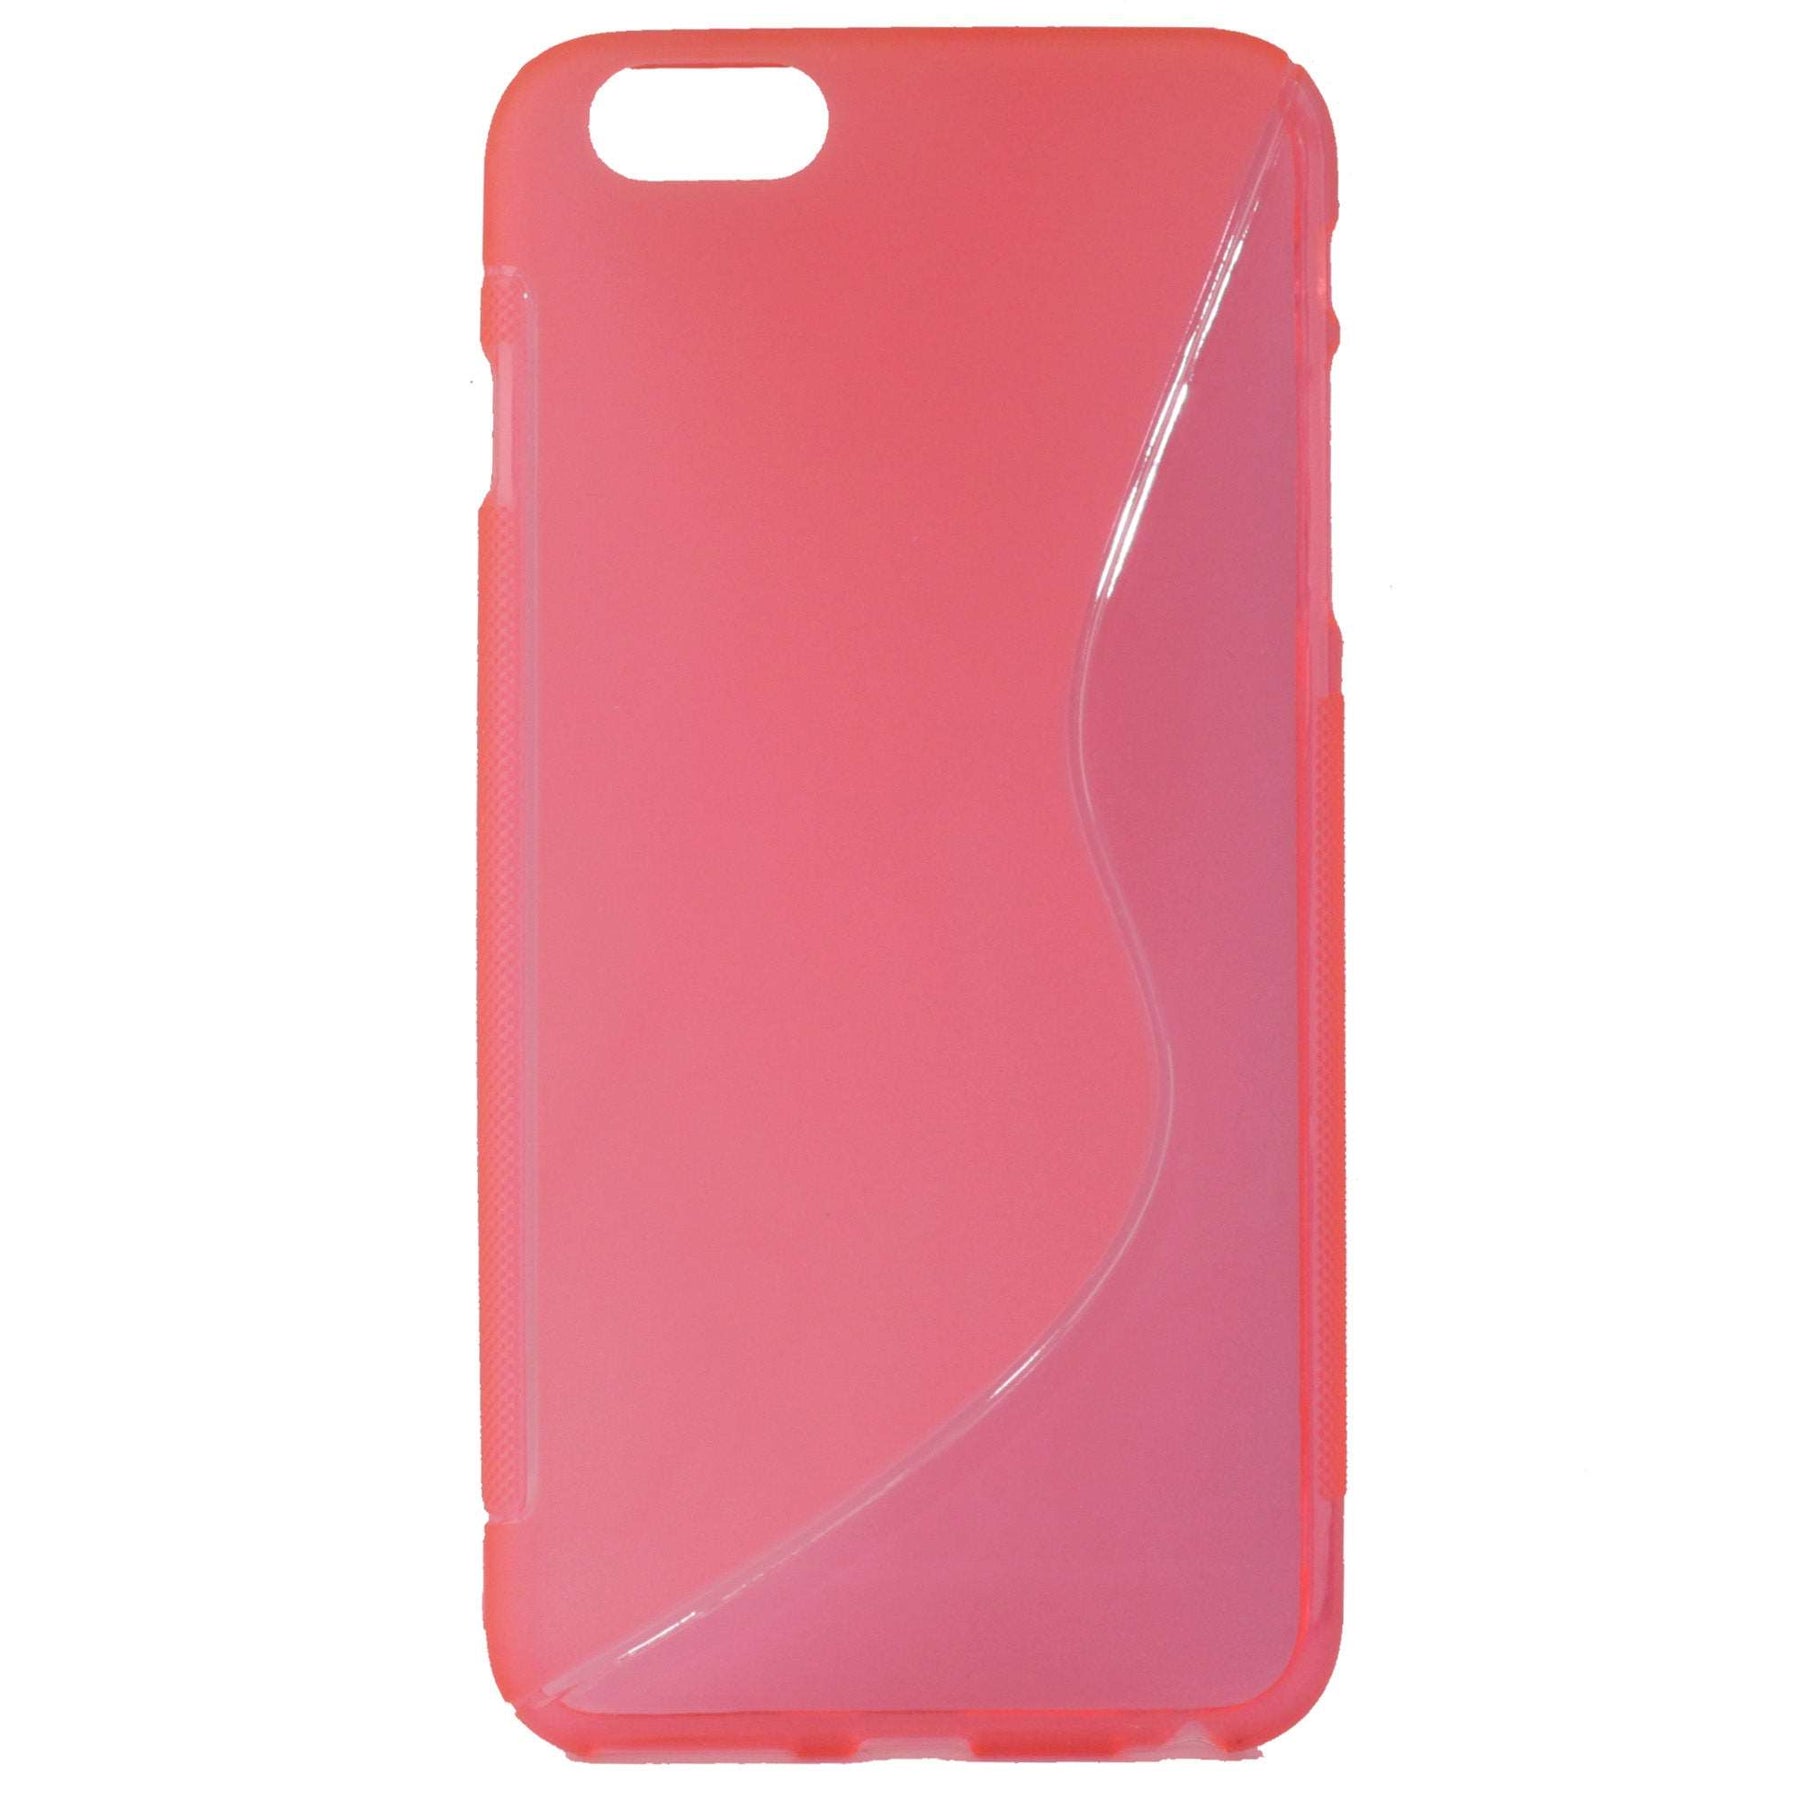 iPhone 6 - 6s pink case